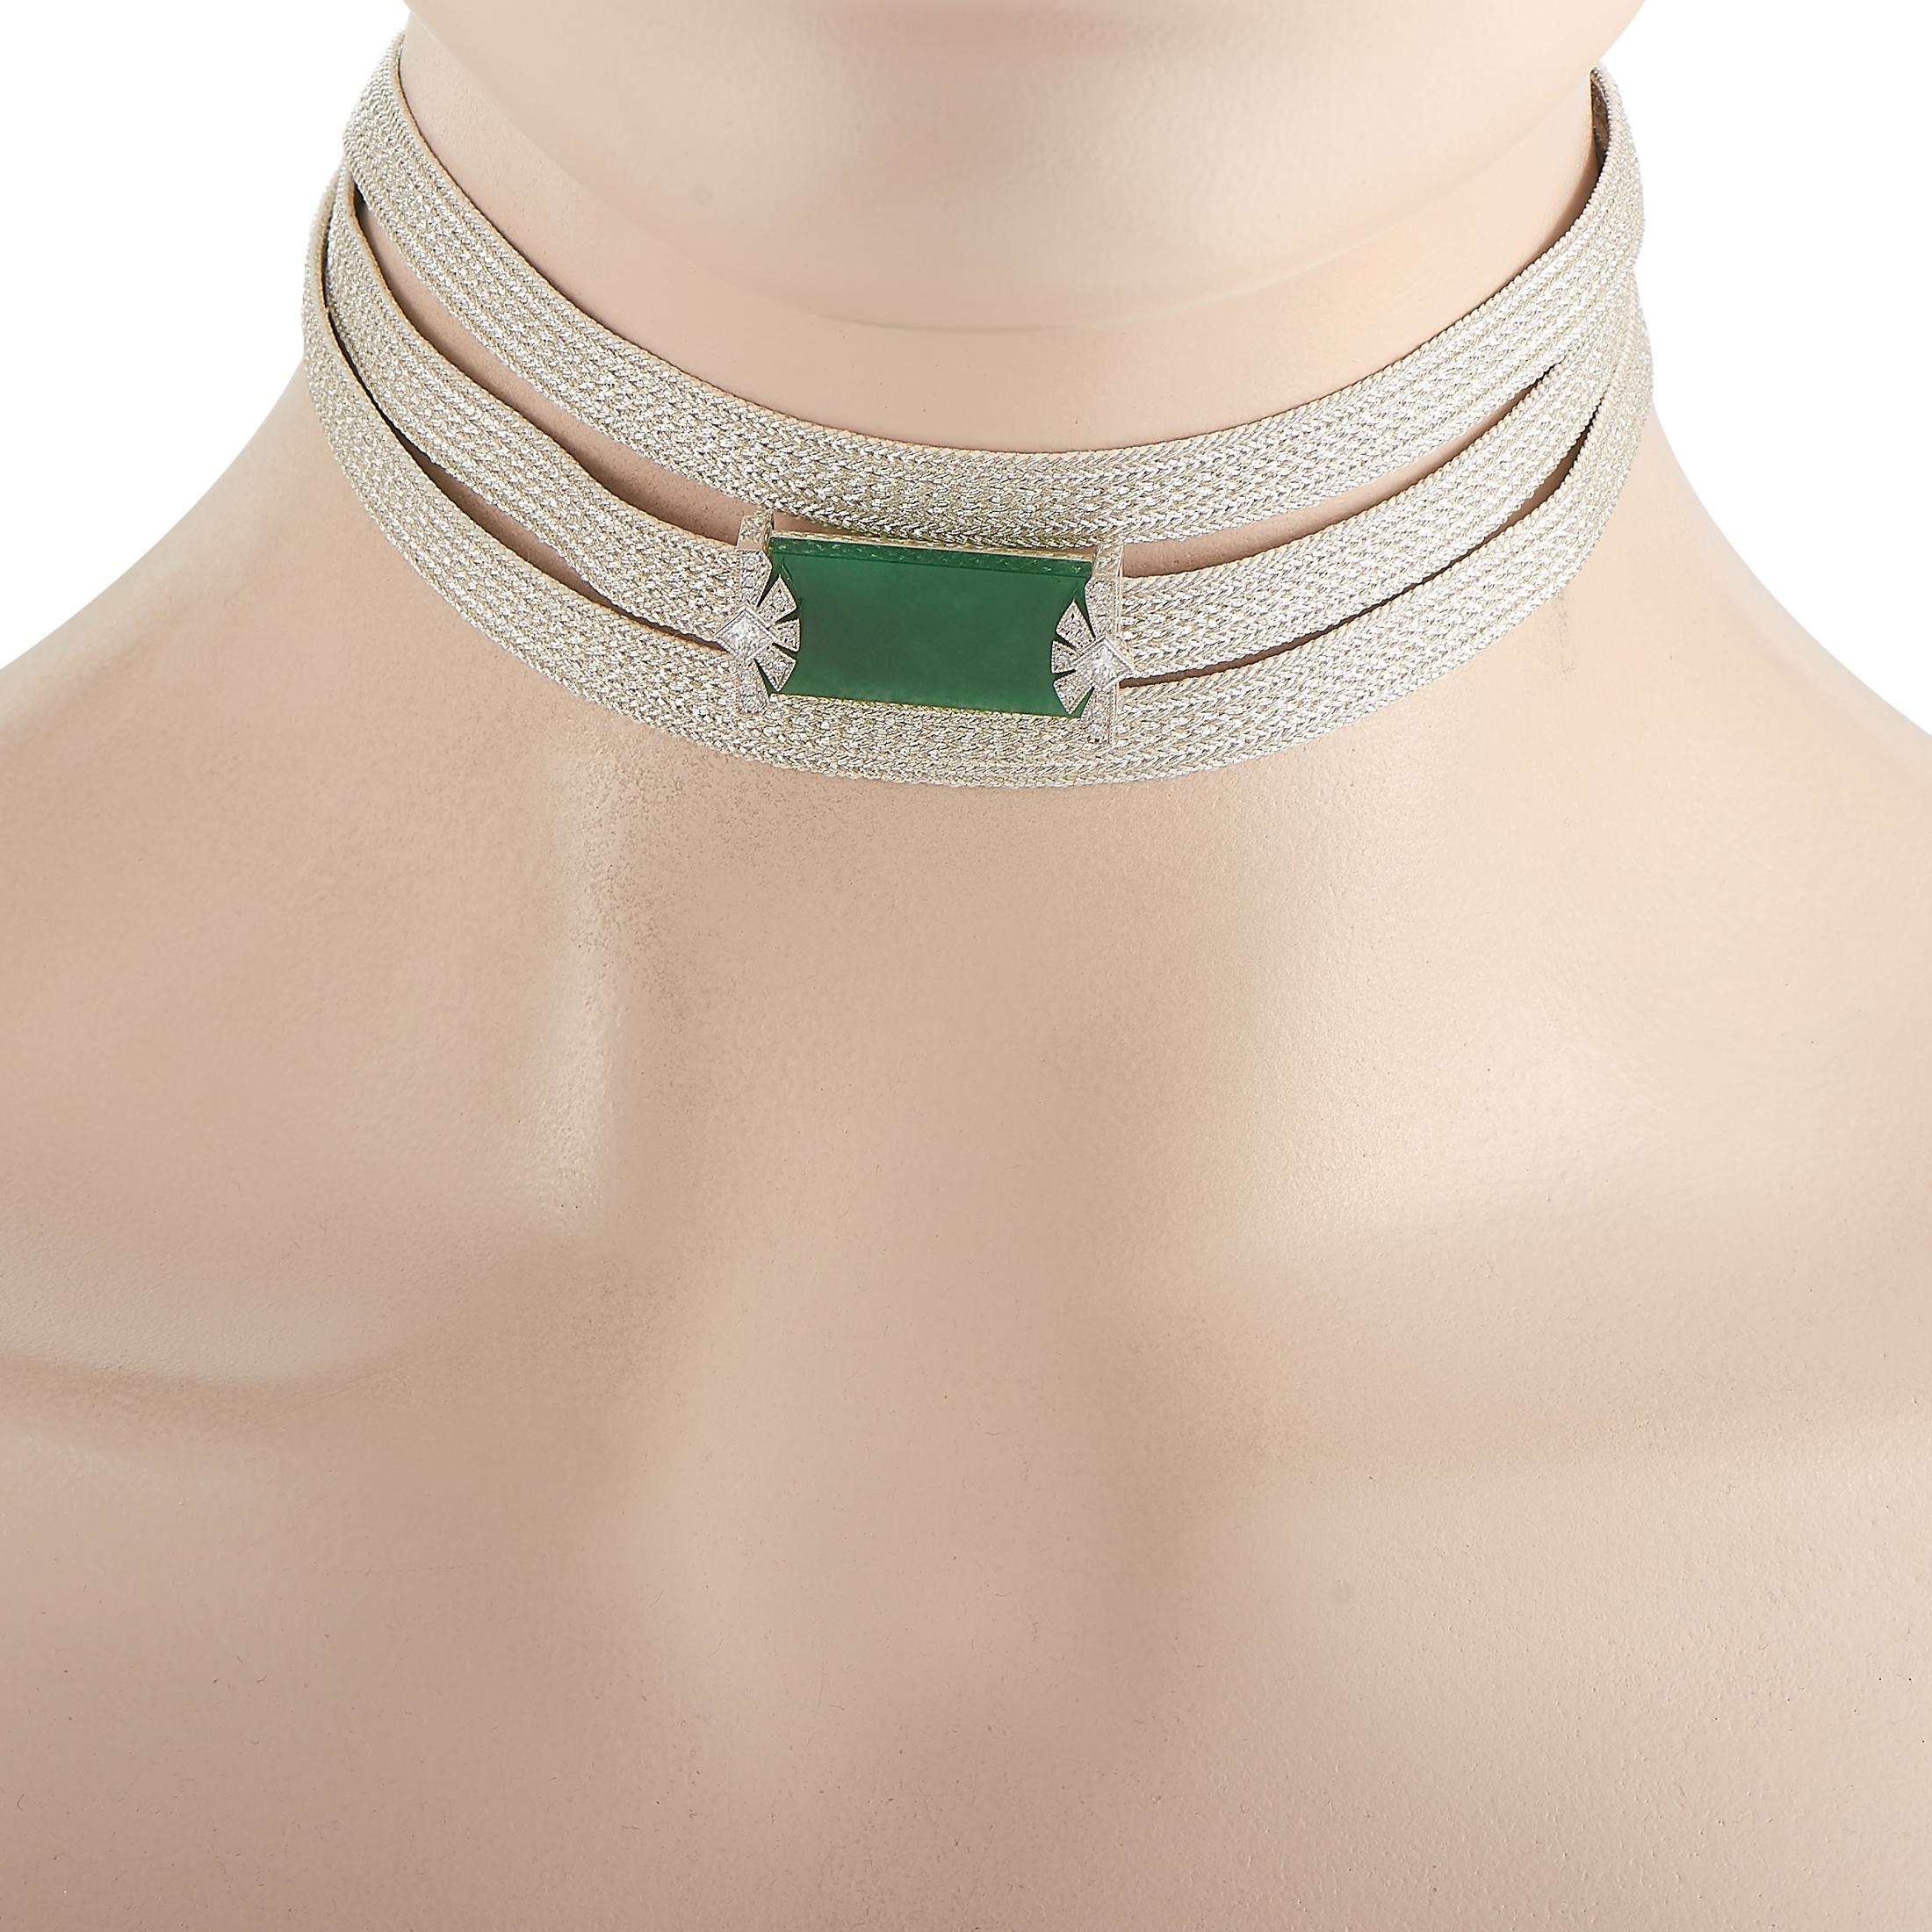 Mixed Cut Mikimoto 18K White Gold 0.43 Ct Diamond and 13.53 Ct Jade Necklace